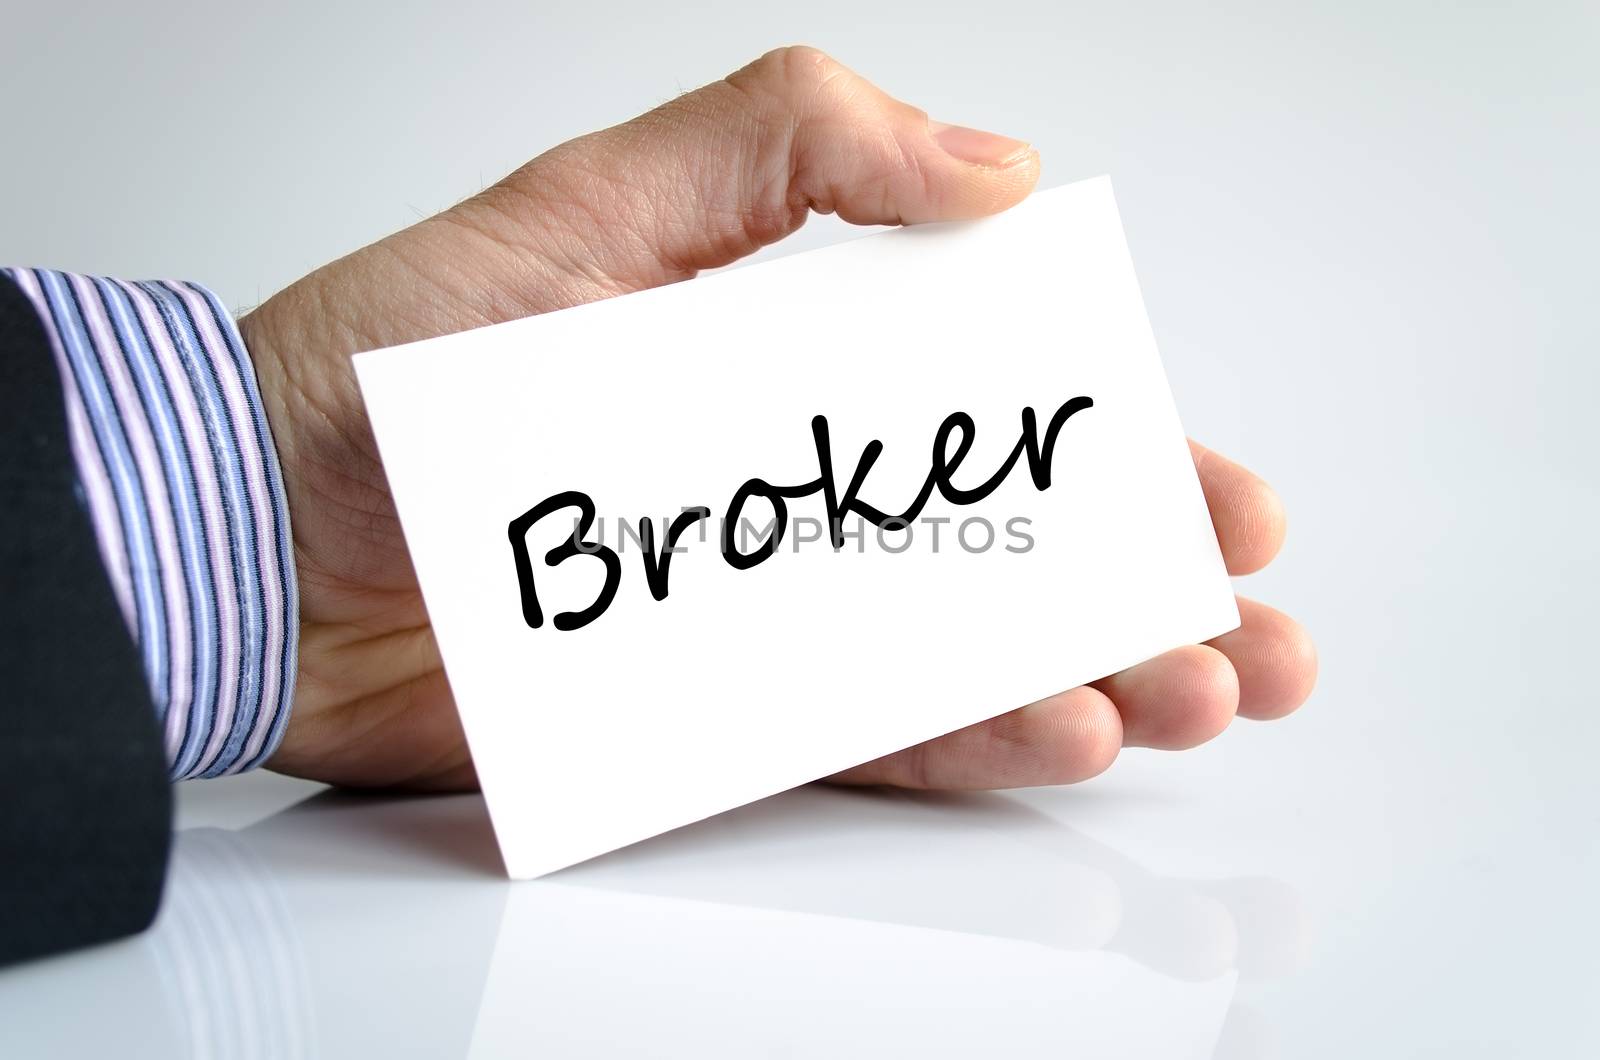 Broker text concept isolated over white background